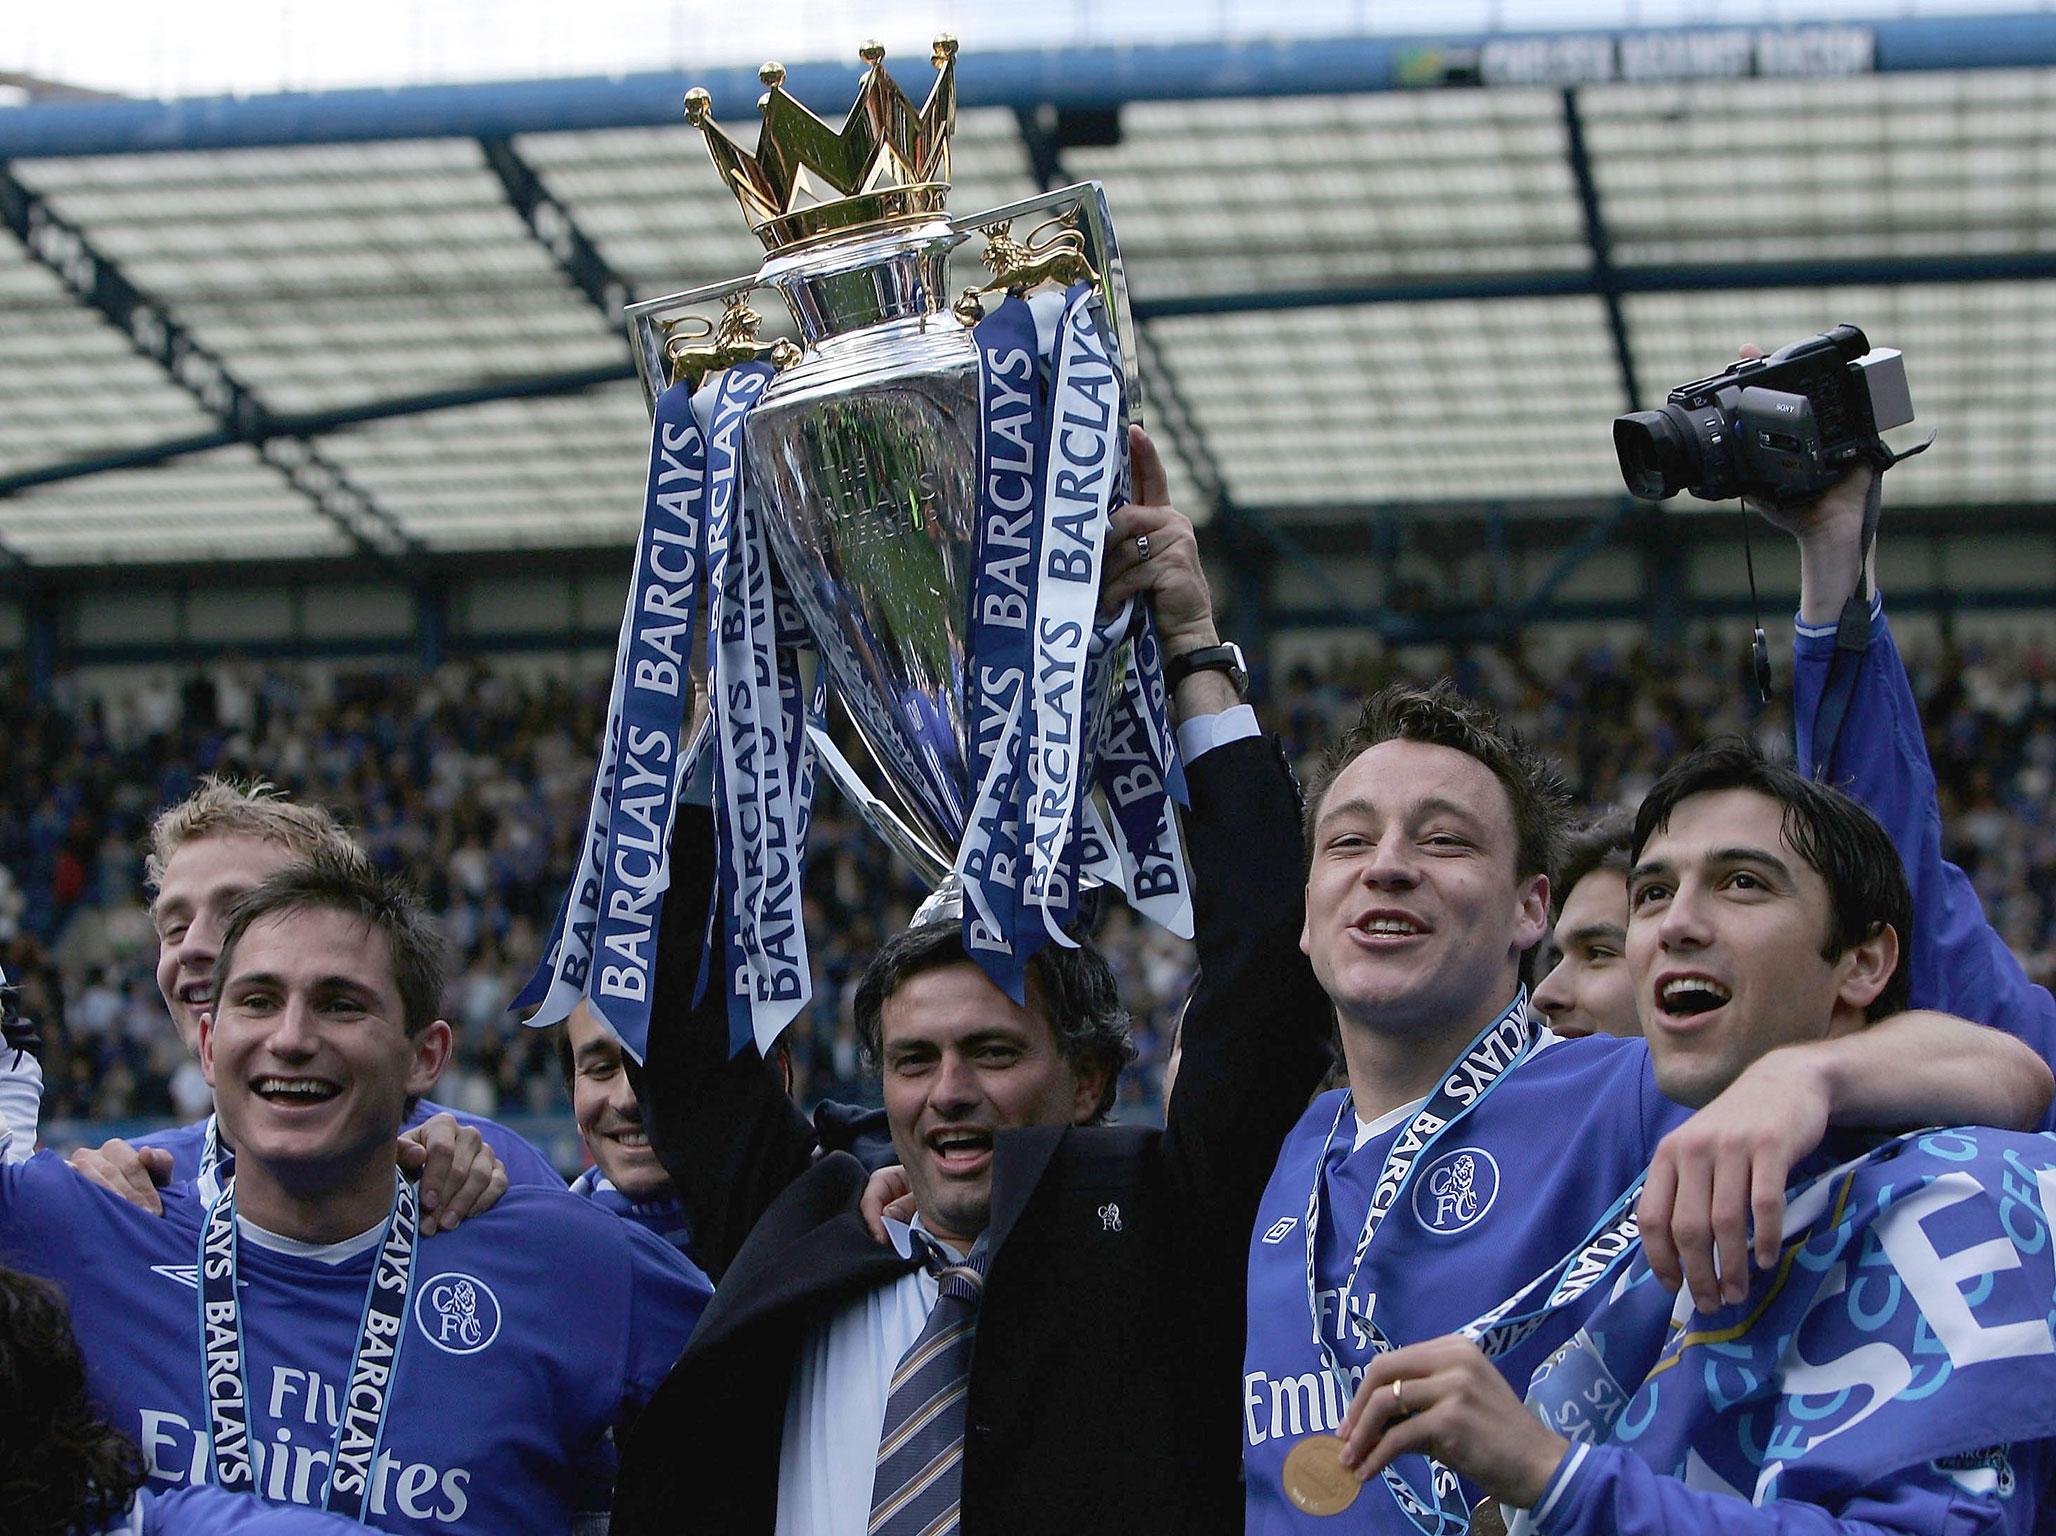 John Terry enjoyed a glittering period of success under Jose Mourinho at Chelsea